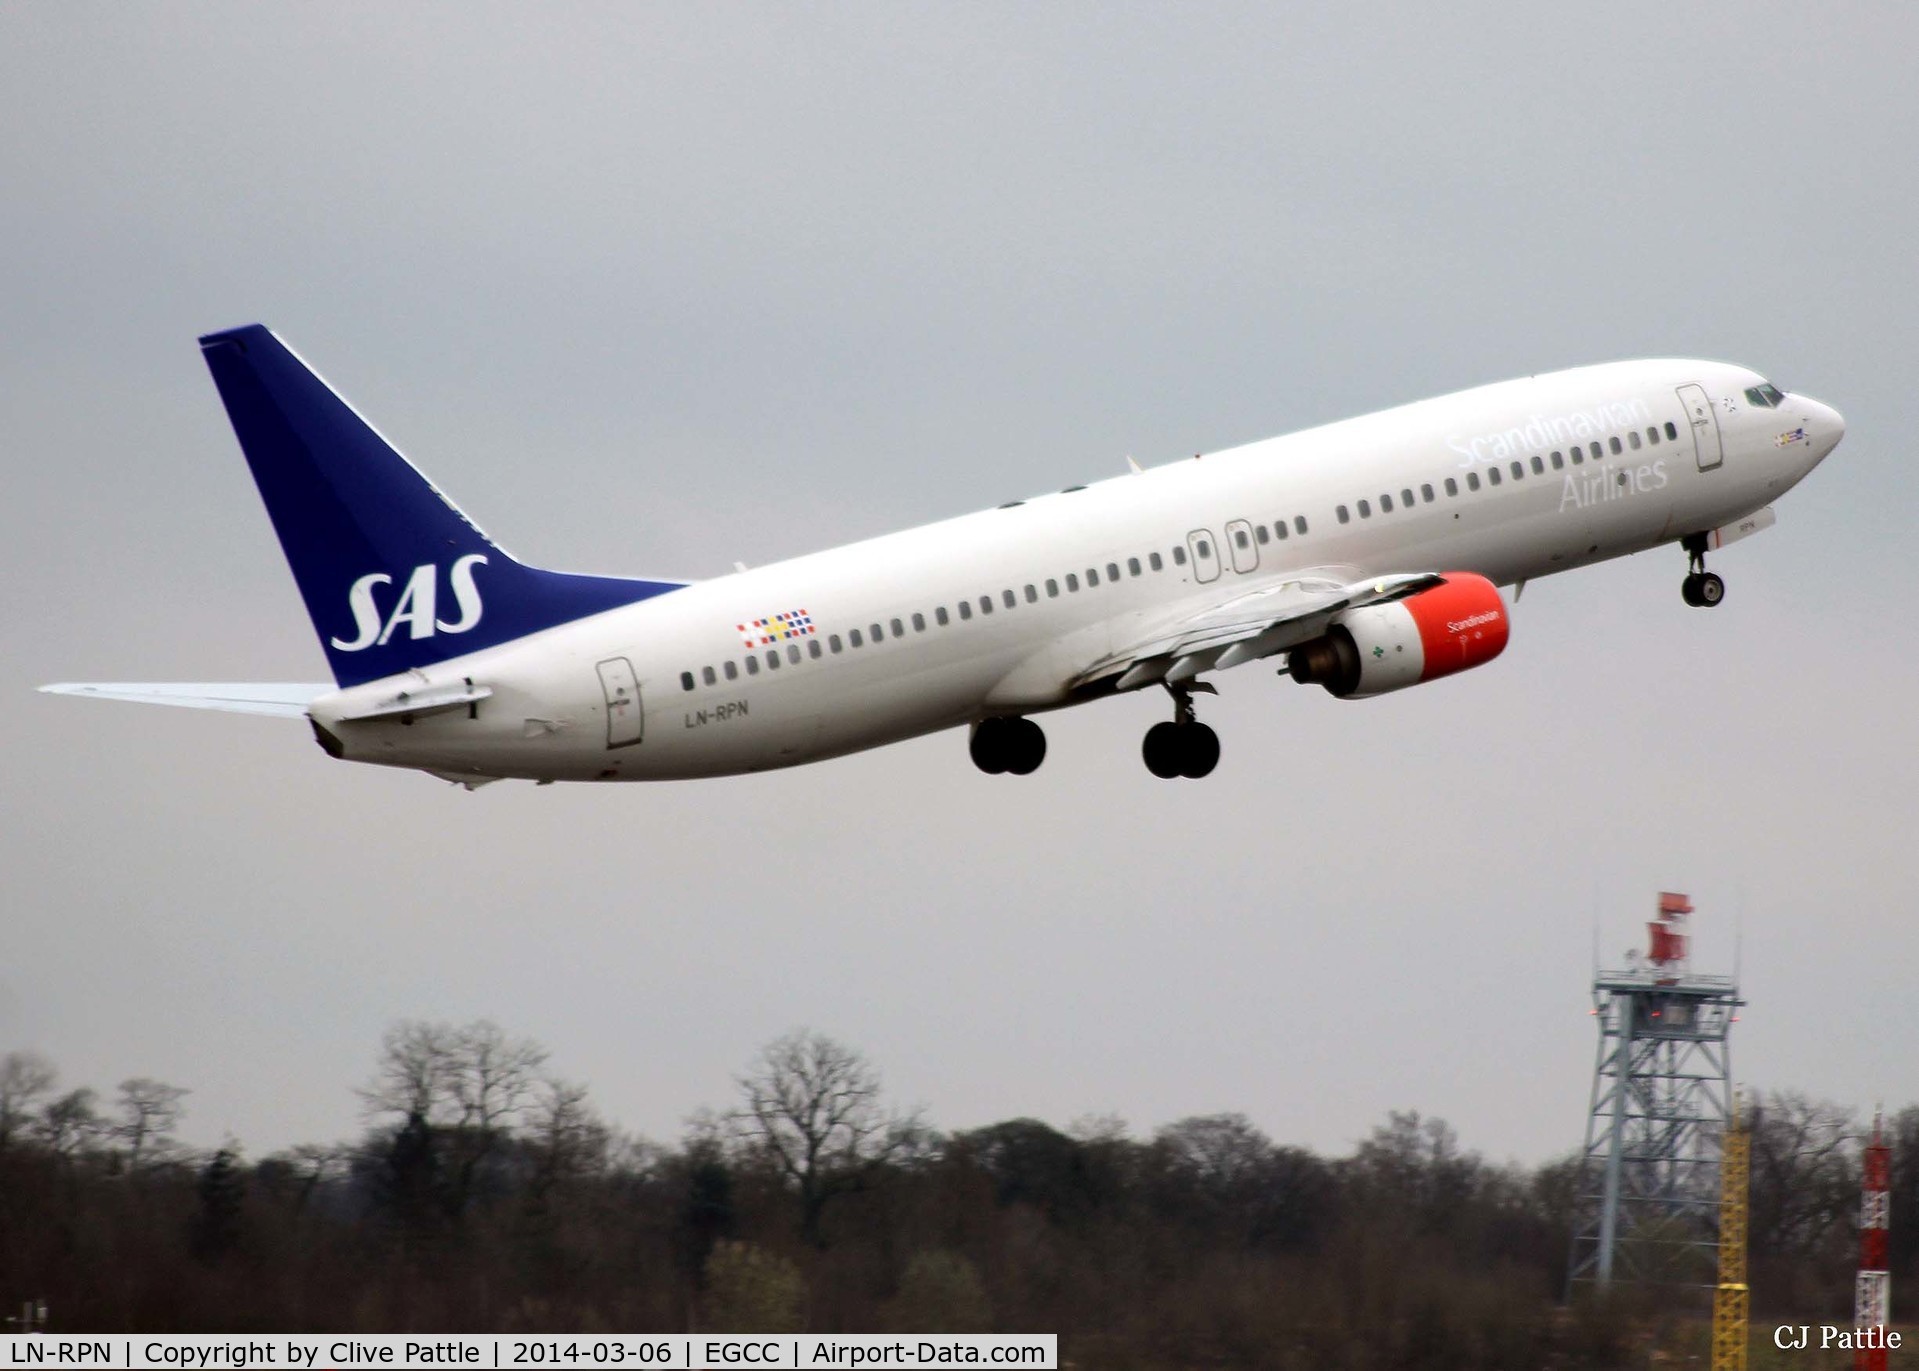 LN-RPN, 2000 Boeing 737-883 C/N 30470, SAS departure from Manchester